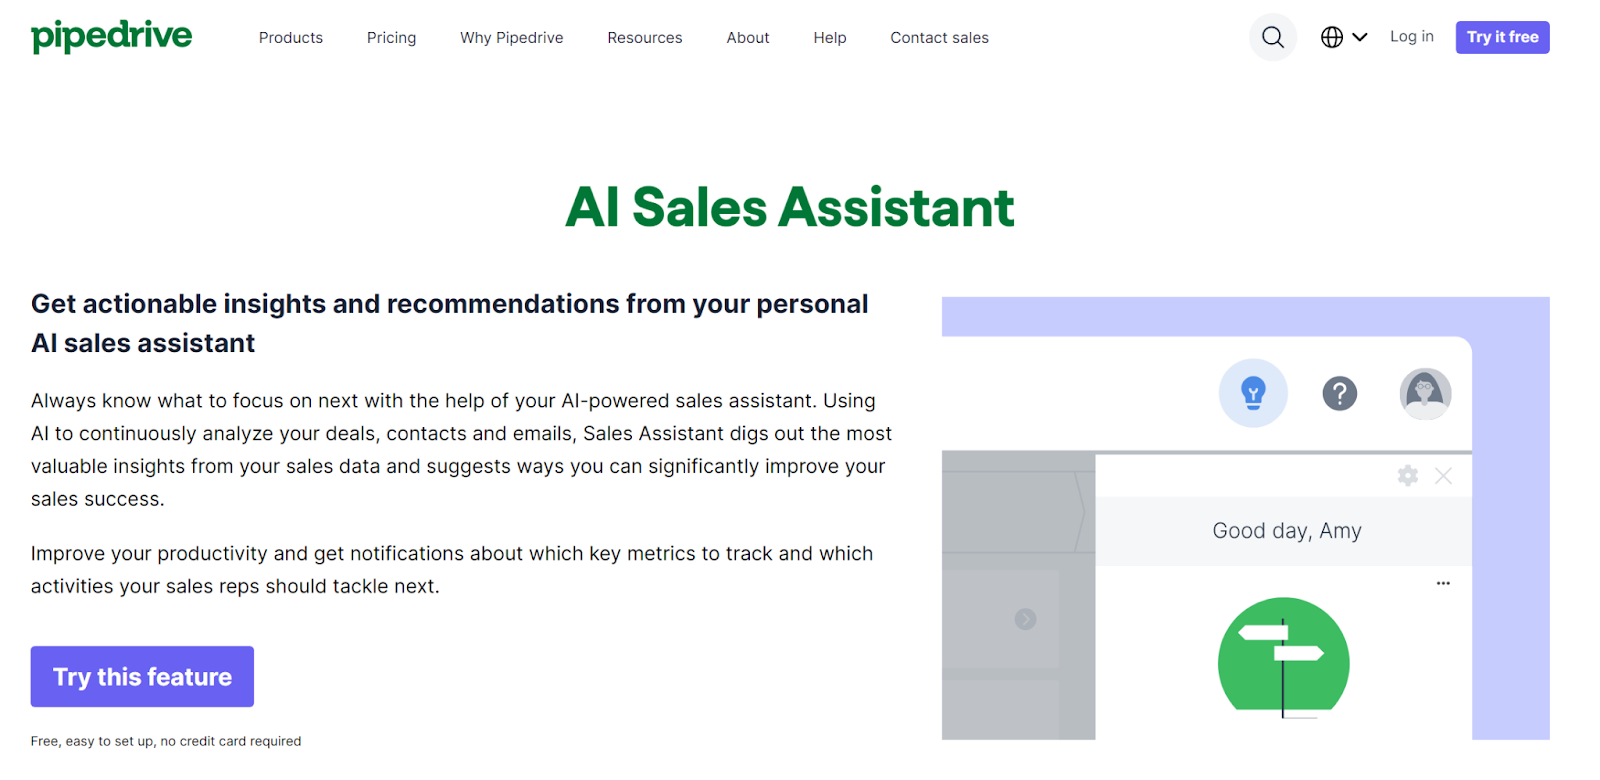 The landing page for Pipedrive's AI Sales Assistant with a button prompting readers to "Try this feature."